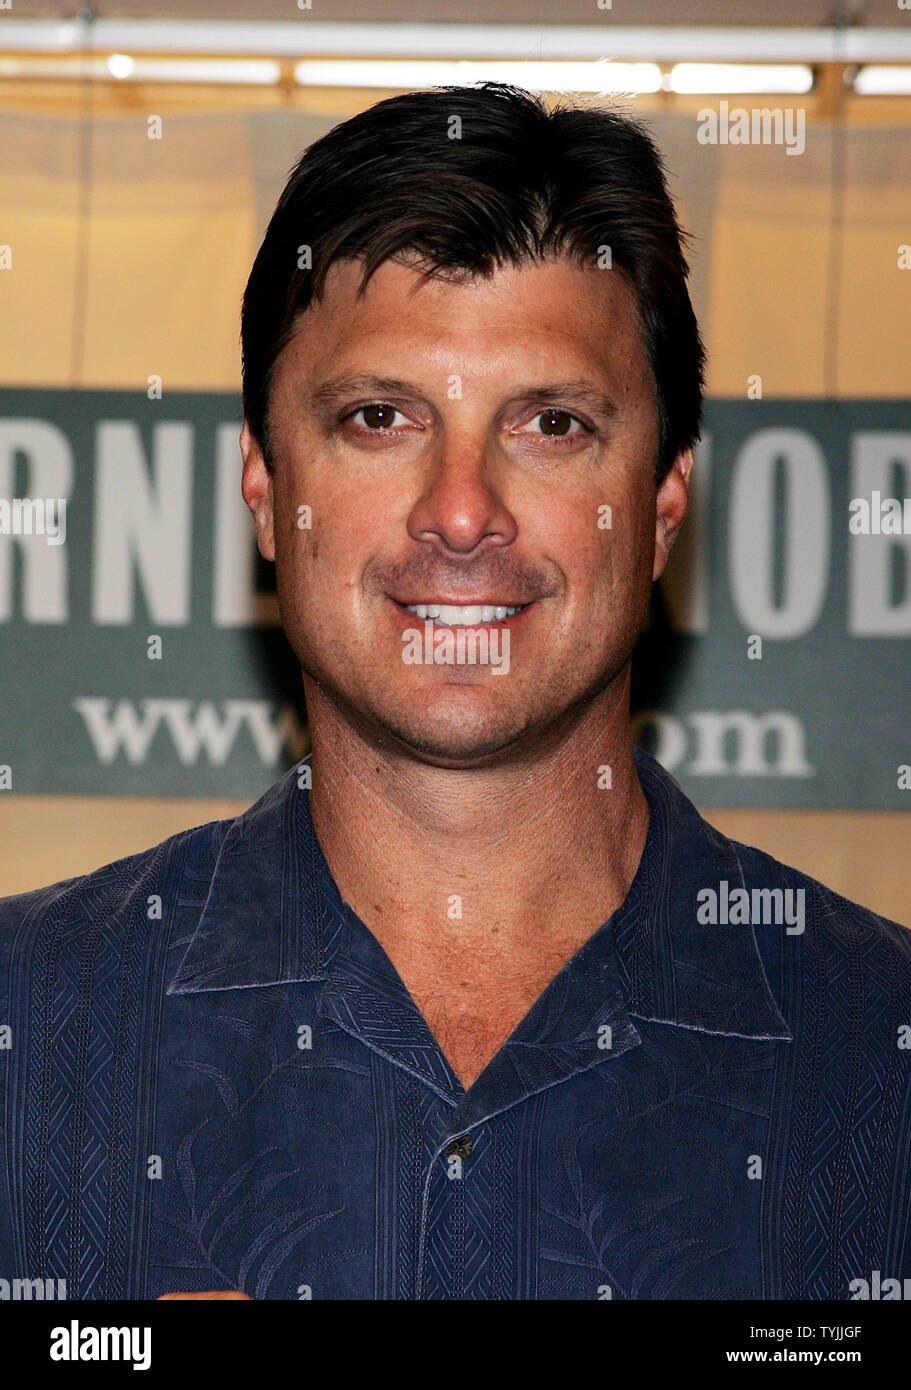 Tino martinez hi-res stock photography and images - Alamy